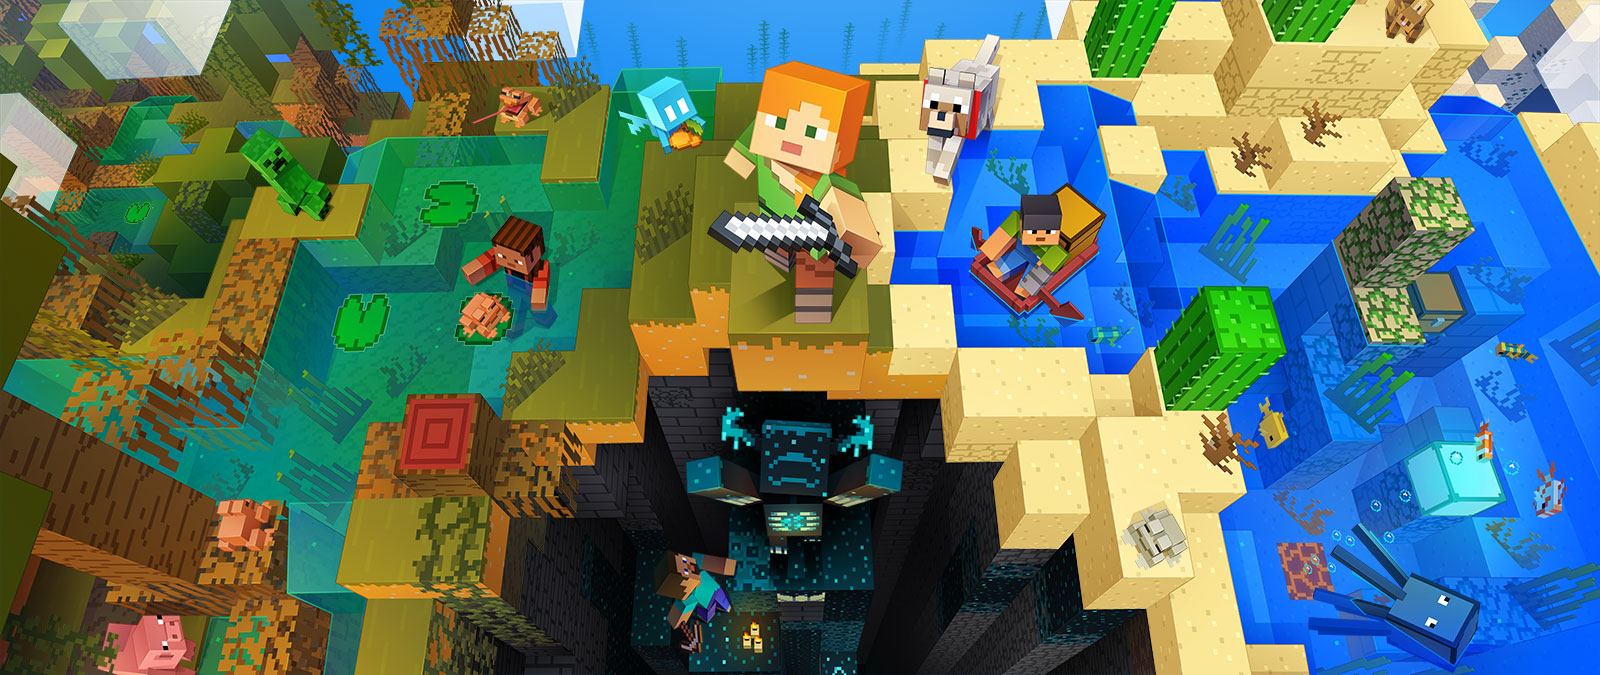 Characters from Minecraft doing various activities in Minecraft